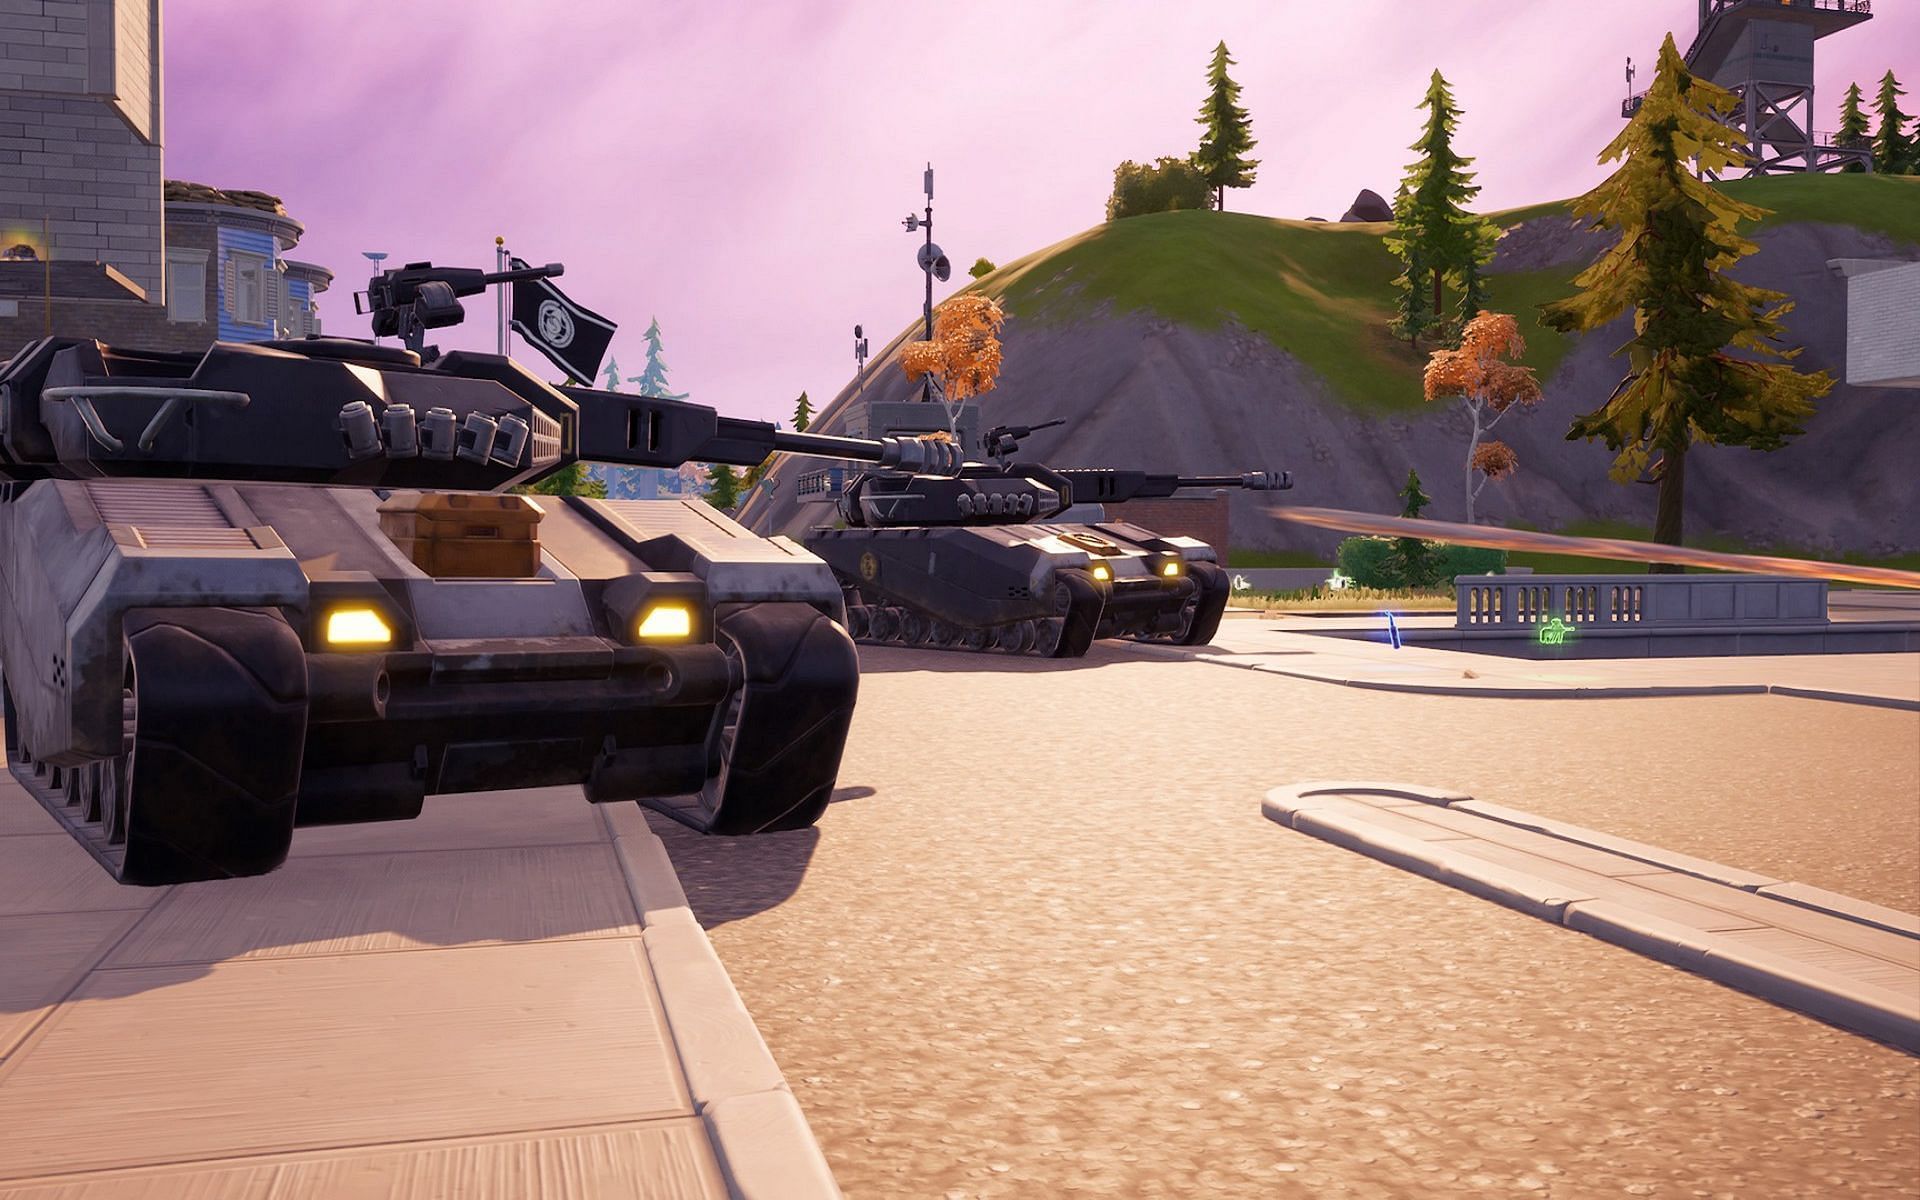 Titan Tanks are a game-changer in Fortnite Chapter 3 Season 2 (Image via Twitter/Afton243)